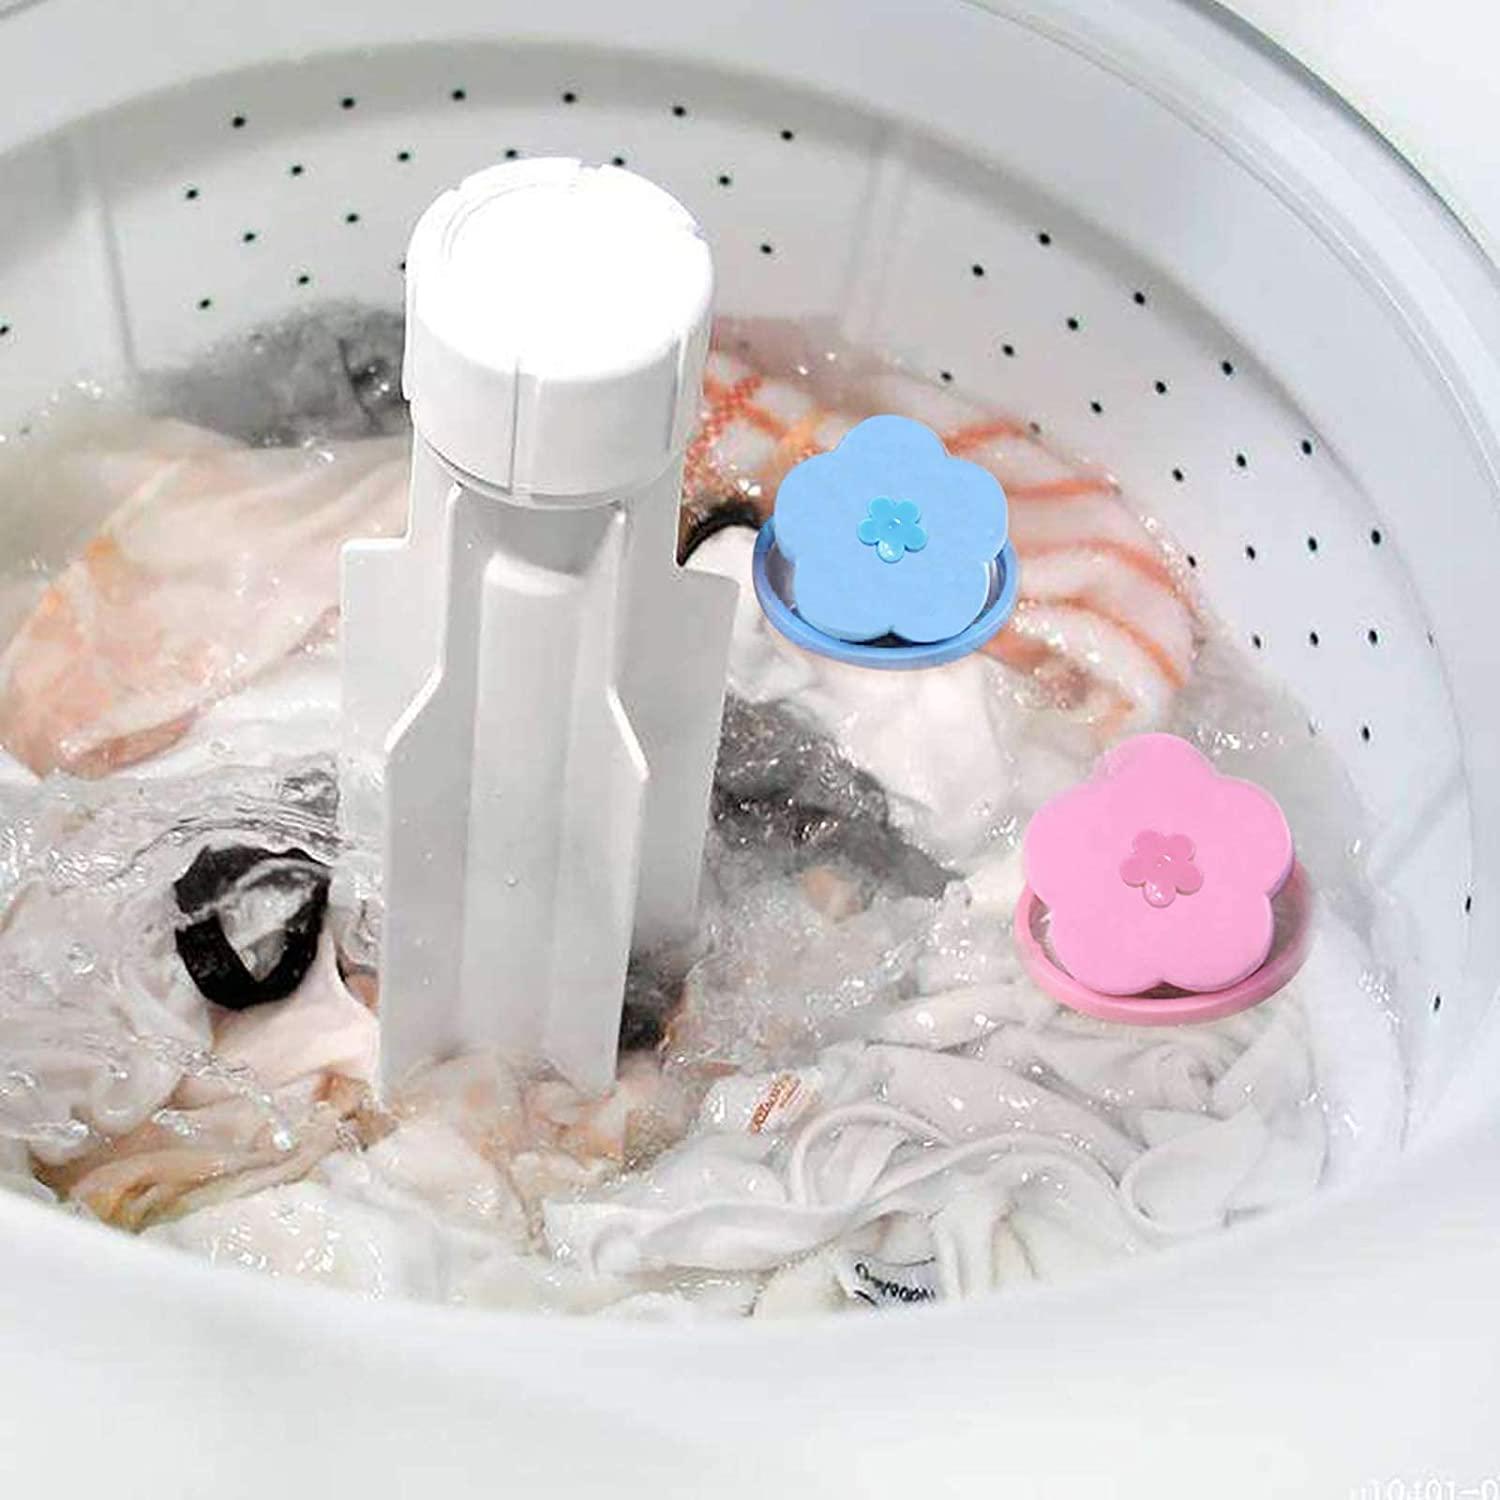 Washing Machine Floating Lint Filter + Mesh Bag, Lint Catcher For